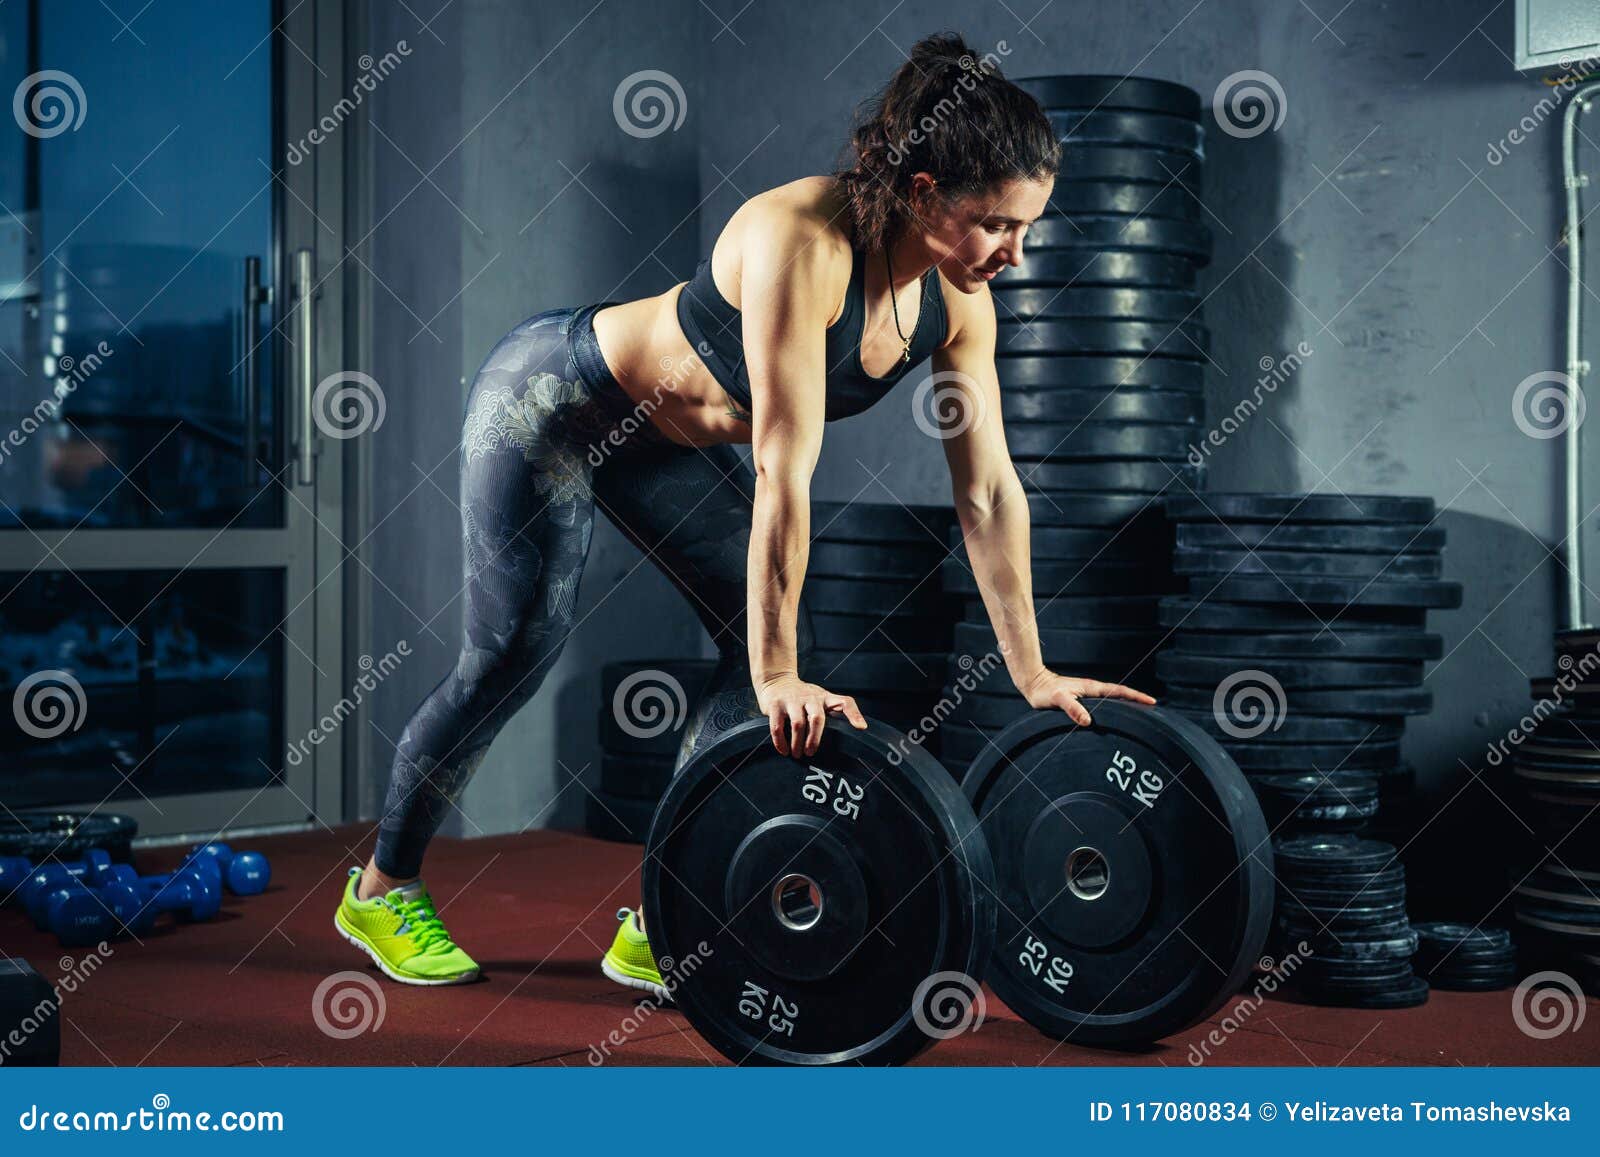 Free Photos - Three Beautiful Women At A Gym, Laughing Together And  Striking A Pose For A Picture. They Are Dressed In Workout Clothing, With  One Of Them Wearing A Tank Top,